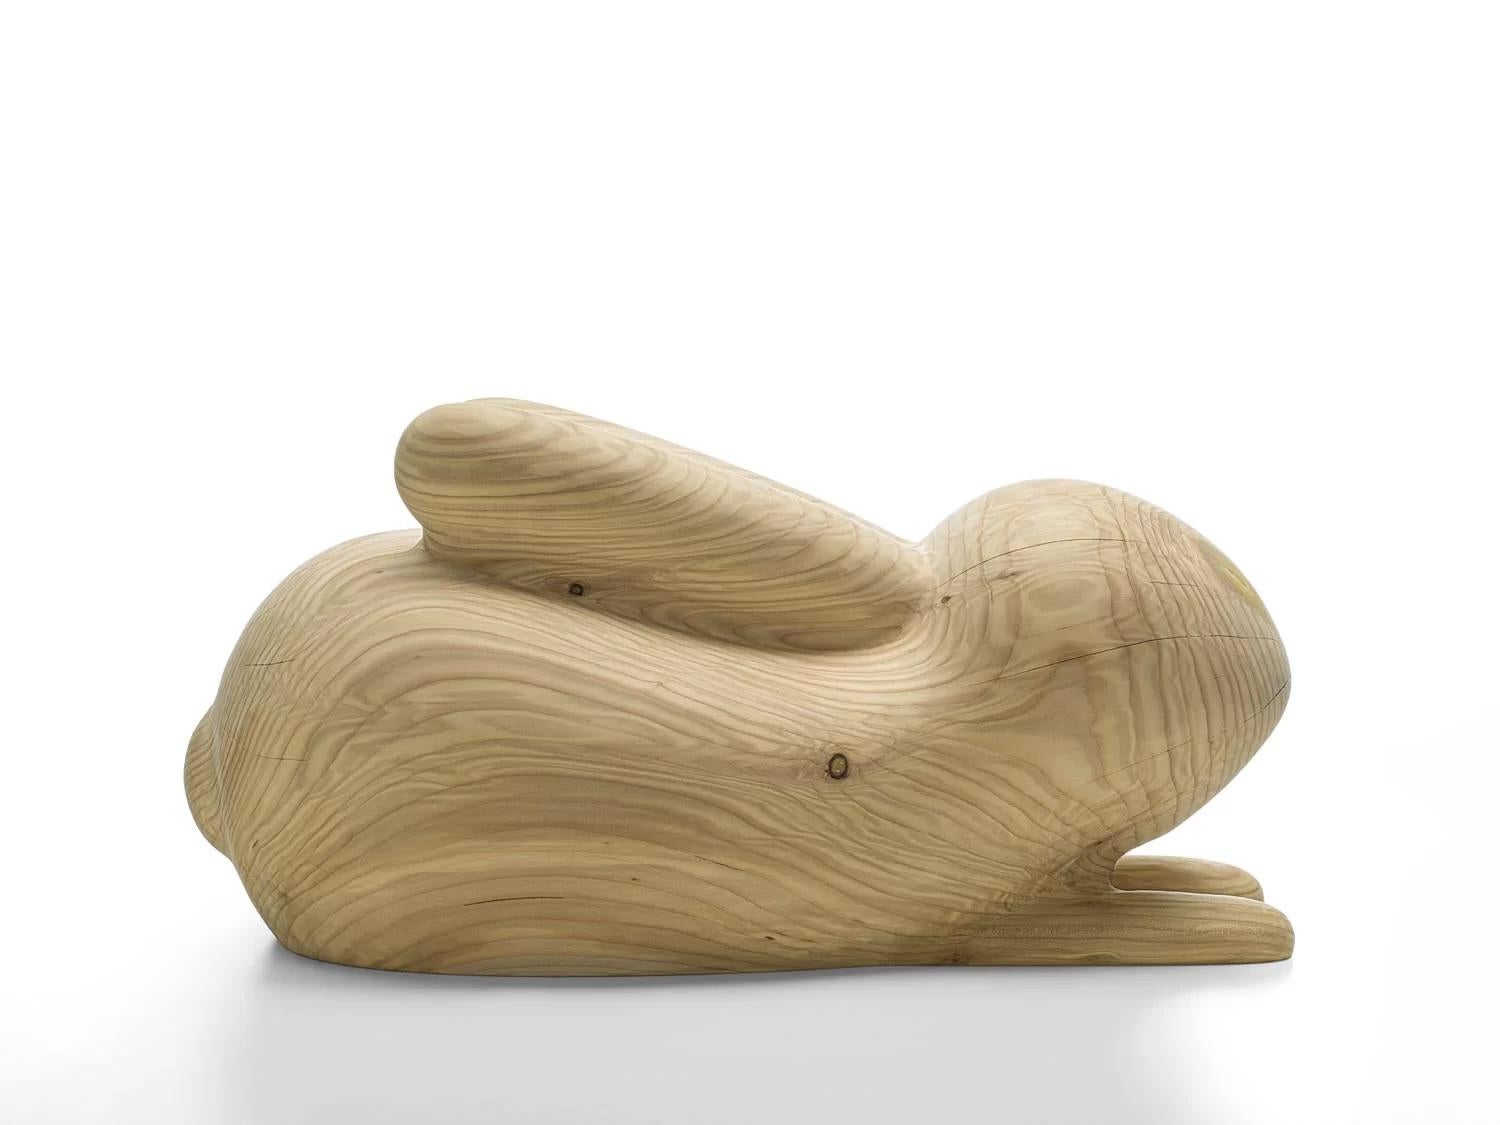 Usako is a furnishing accessory made from solid Lebanese scented cedar wood, expertly carved from a single block. Its sculptural design is inspired by an adorable rabbit. Available in three sizes: big, medium and small.